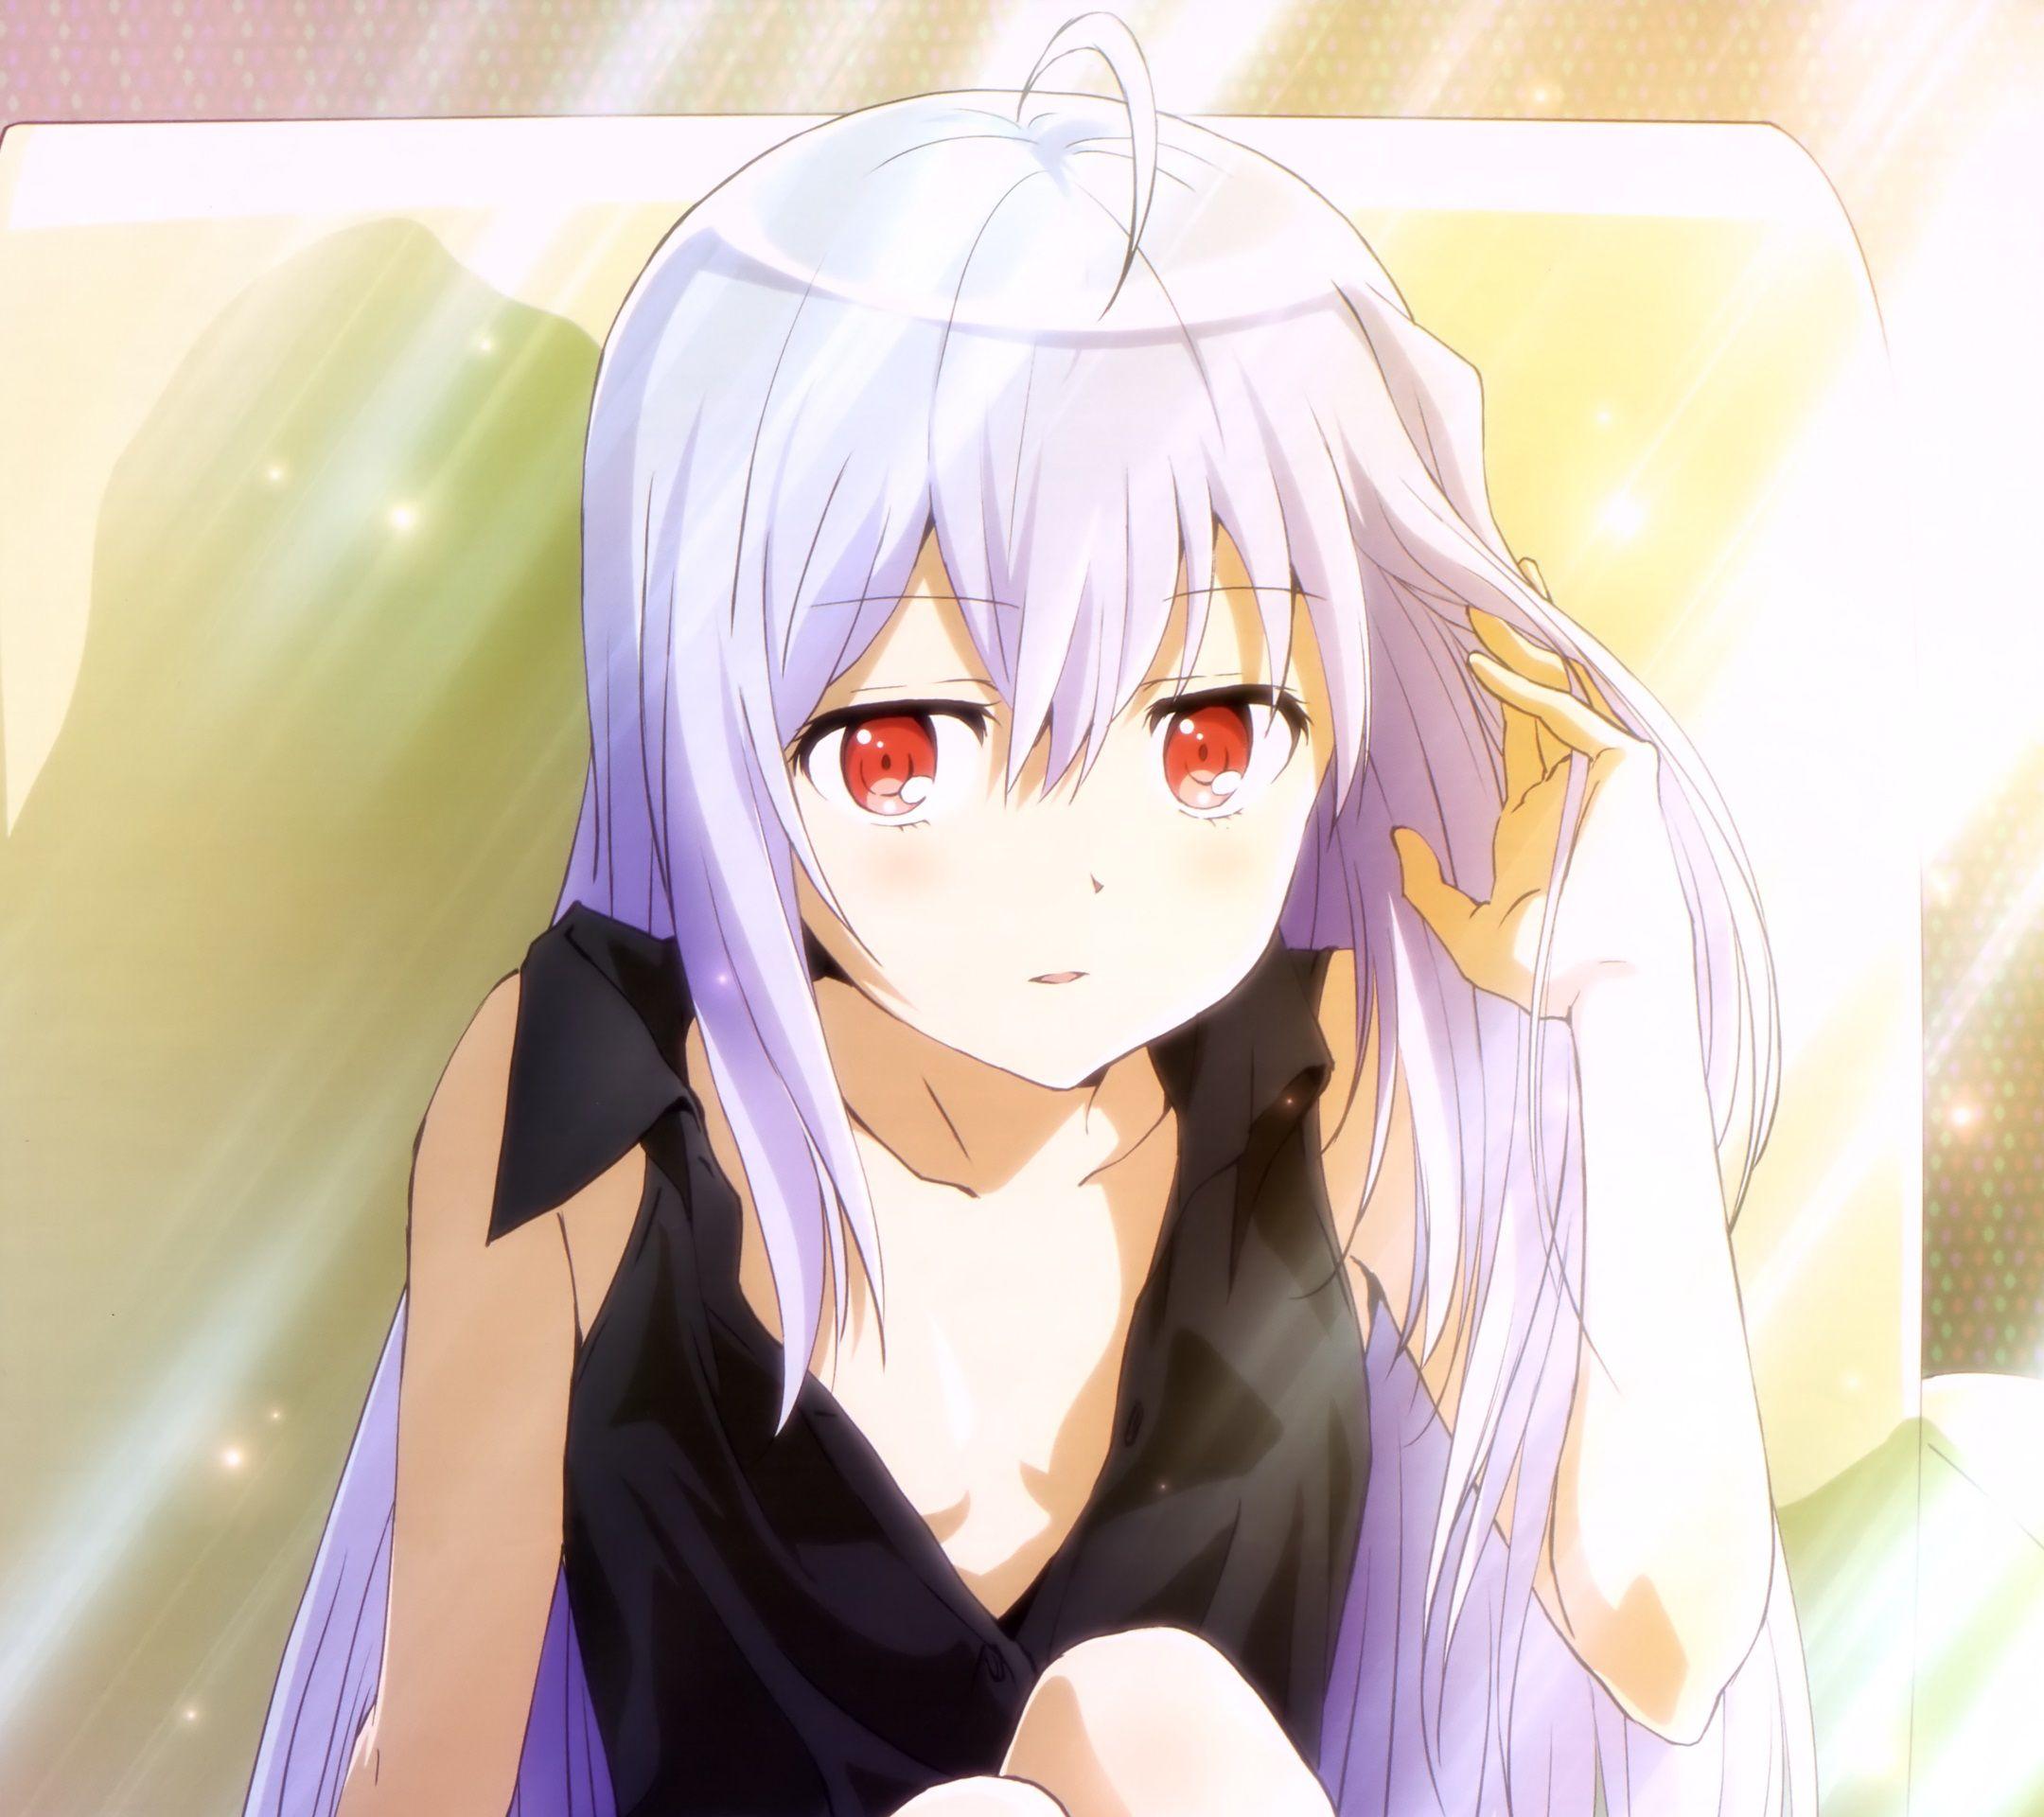 Plastic Memories anime wallpaper for android smartphones and iPhone